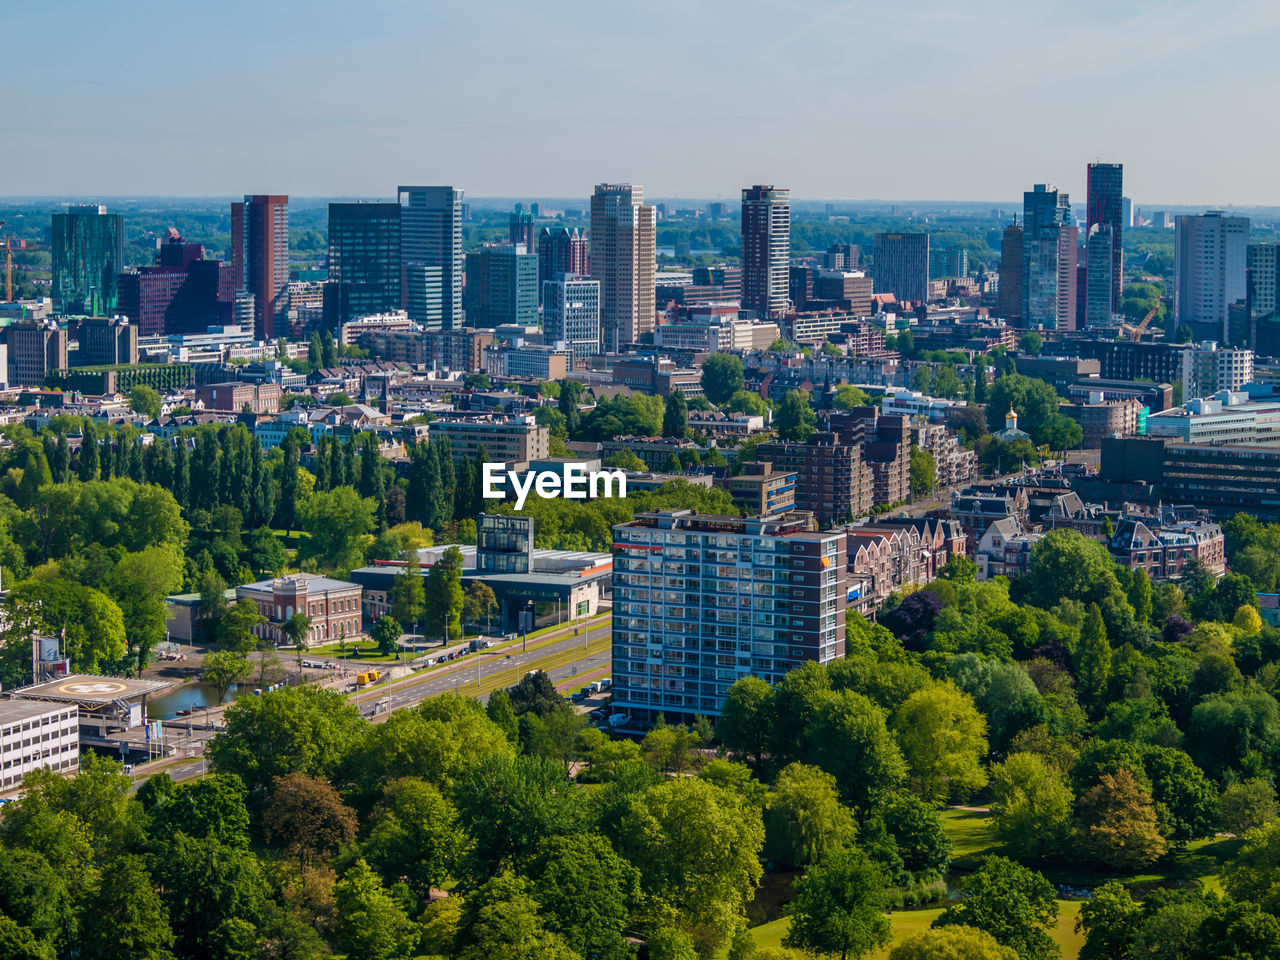 Aerial cityscape of a part of the city of rotterdam, buildings, skyscraper abundant green trees